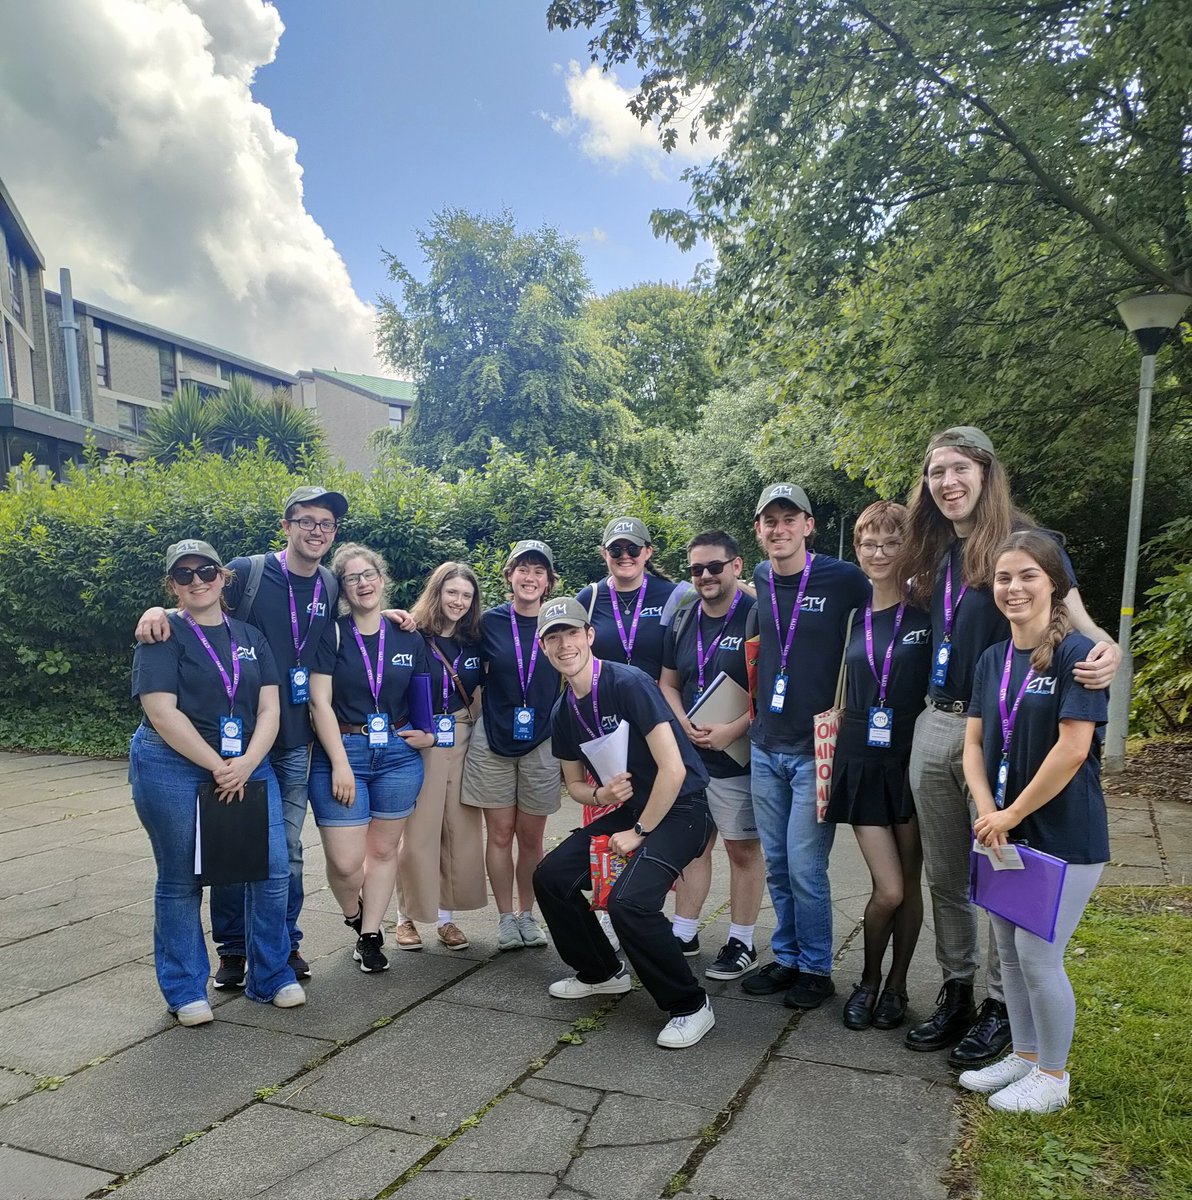 Our @CTYI Residential Assistants are looking forward to welcoming students to the beautiful @DCU_IoE campus! 🌈